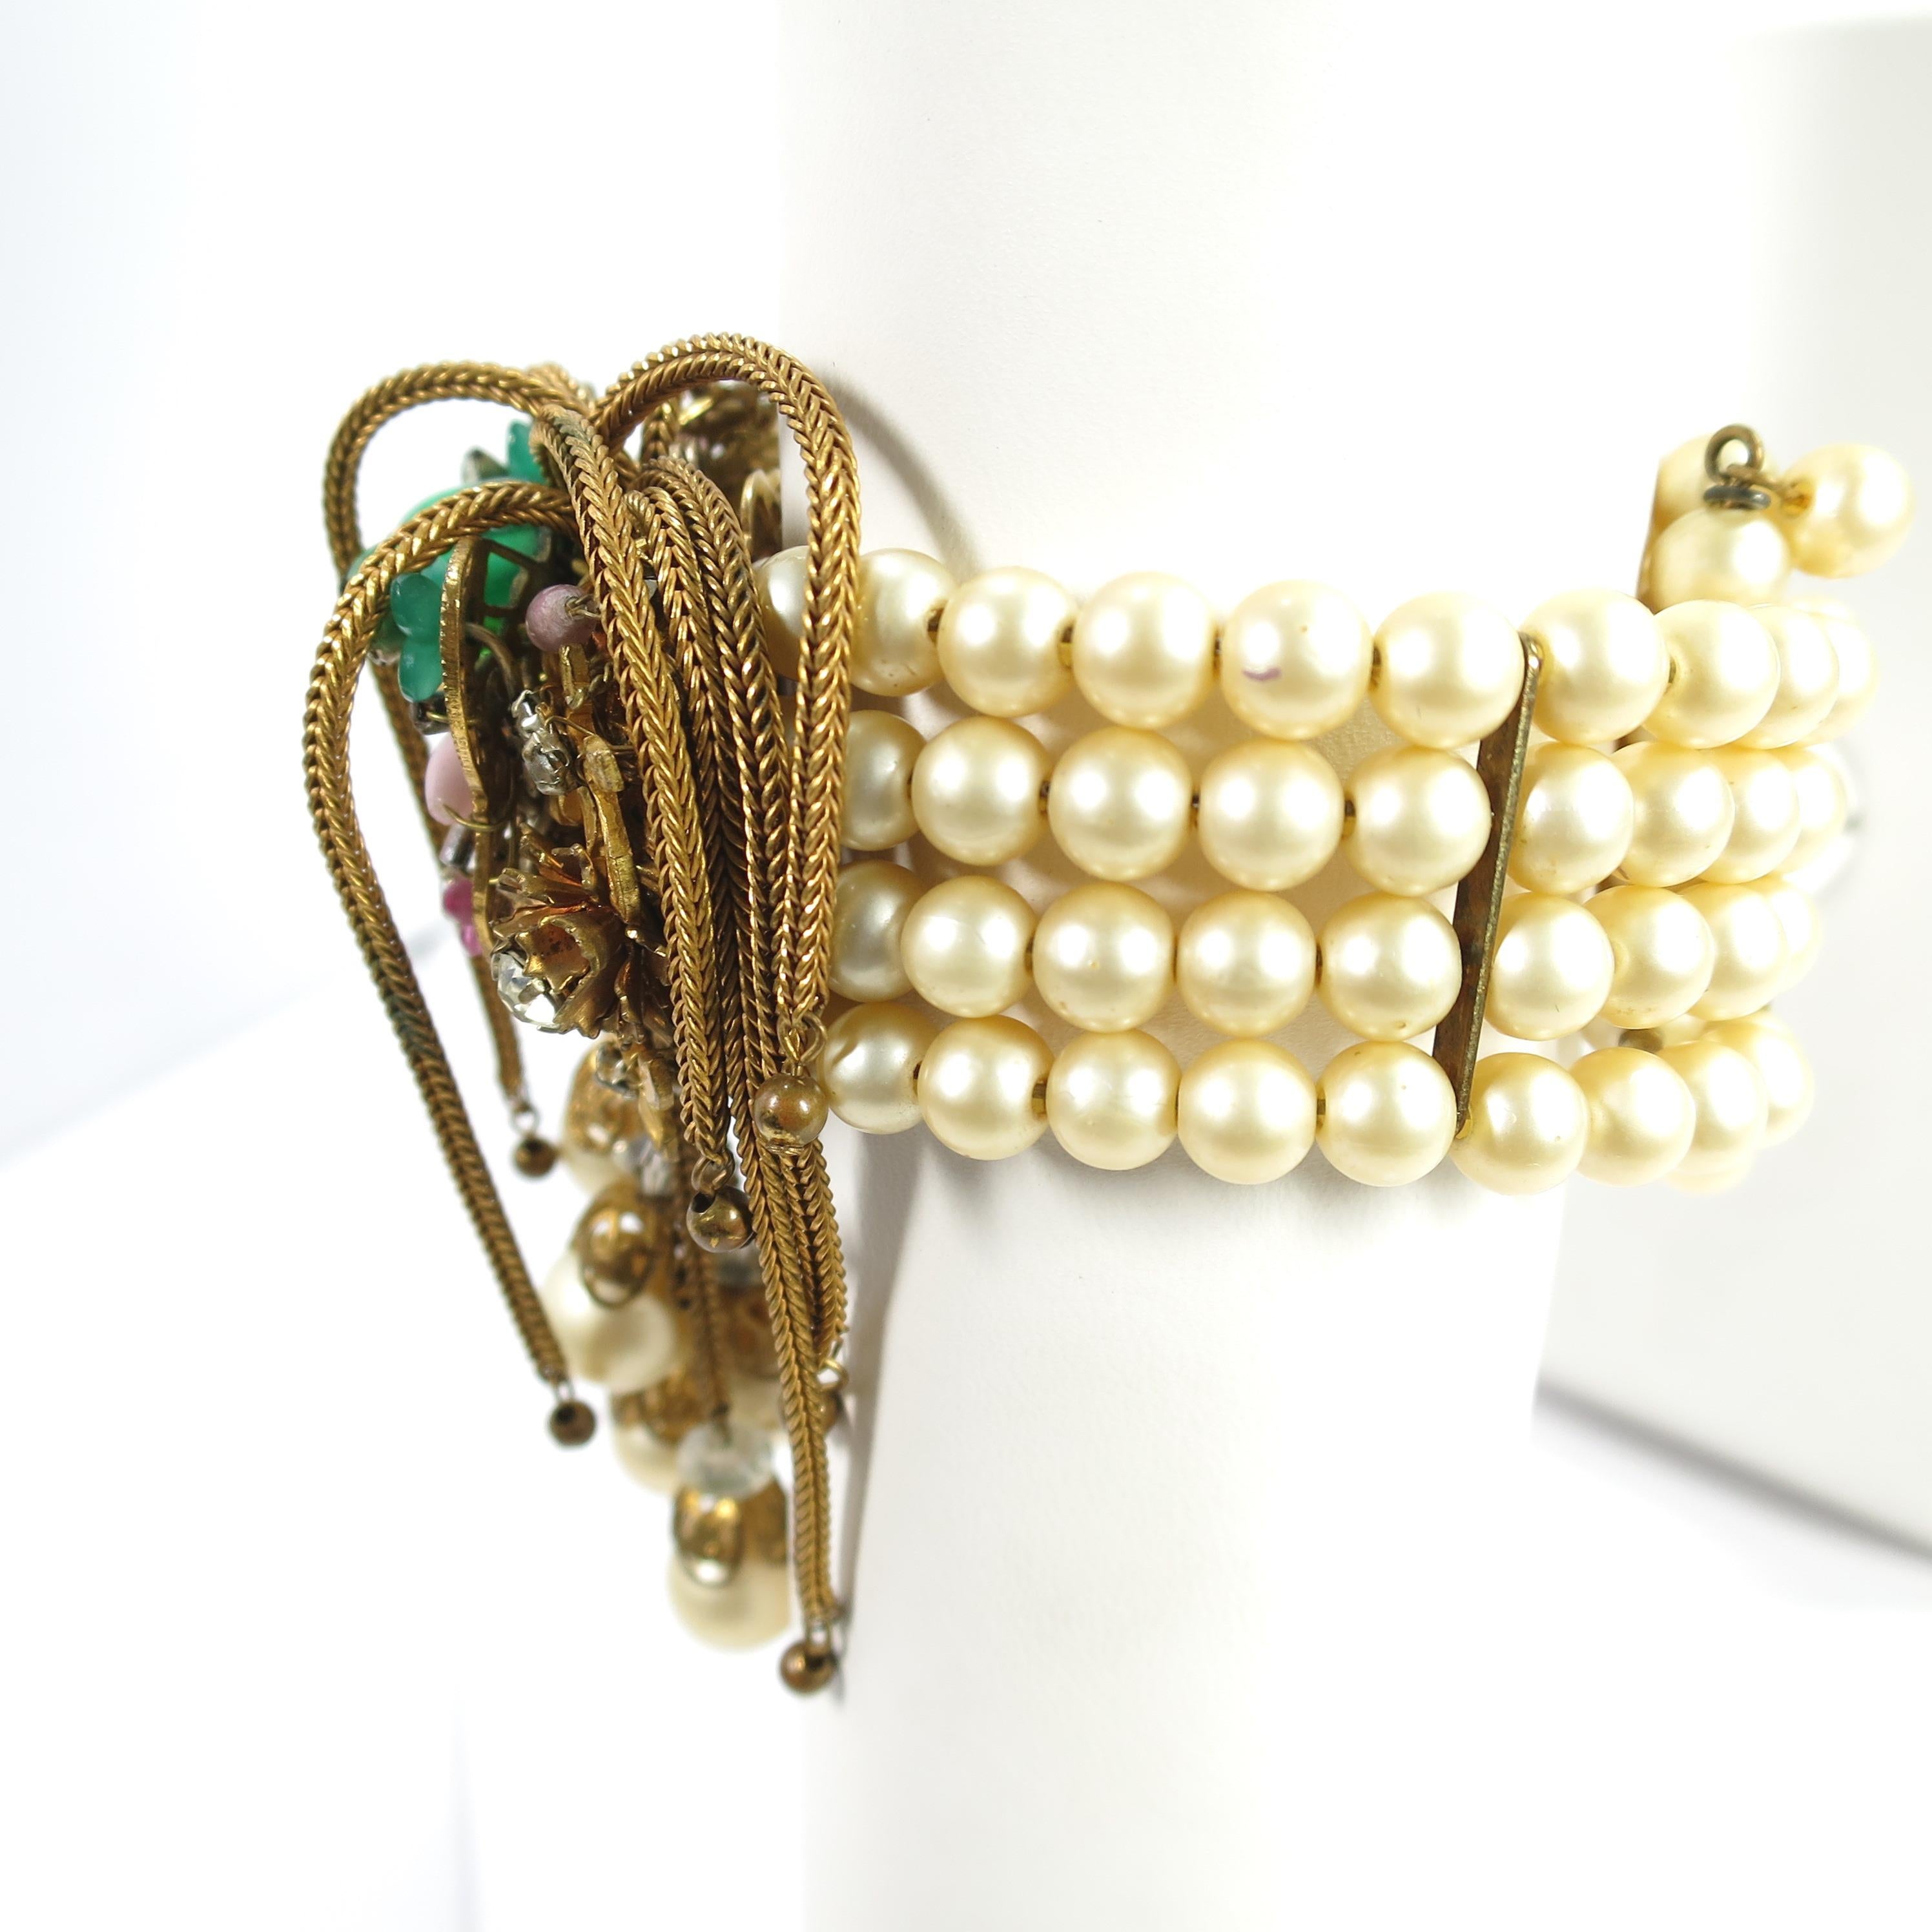 Women's Miriam Haskell Faux Pearl, Crystal, & Art Glass Cuff Bracelet, 1950s For Sale